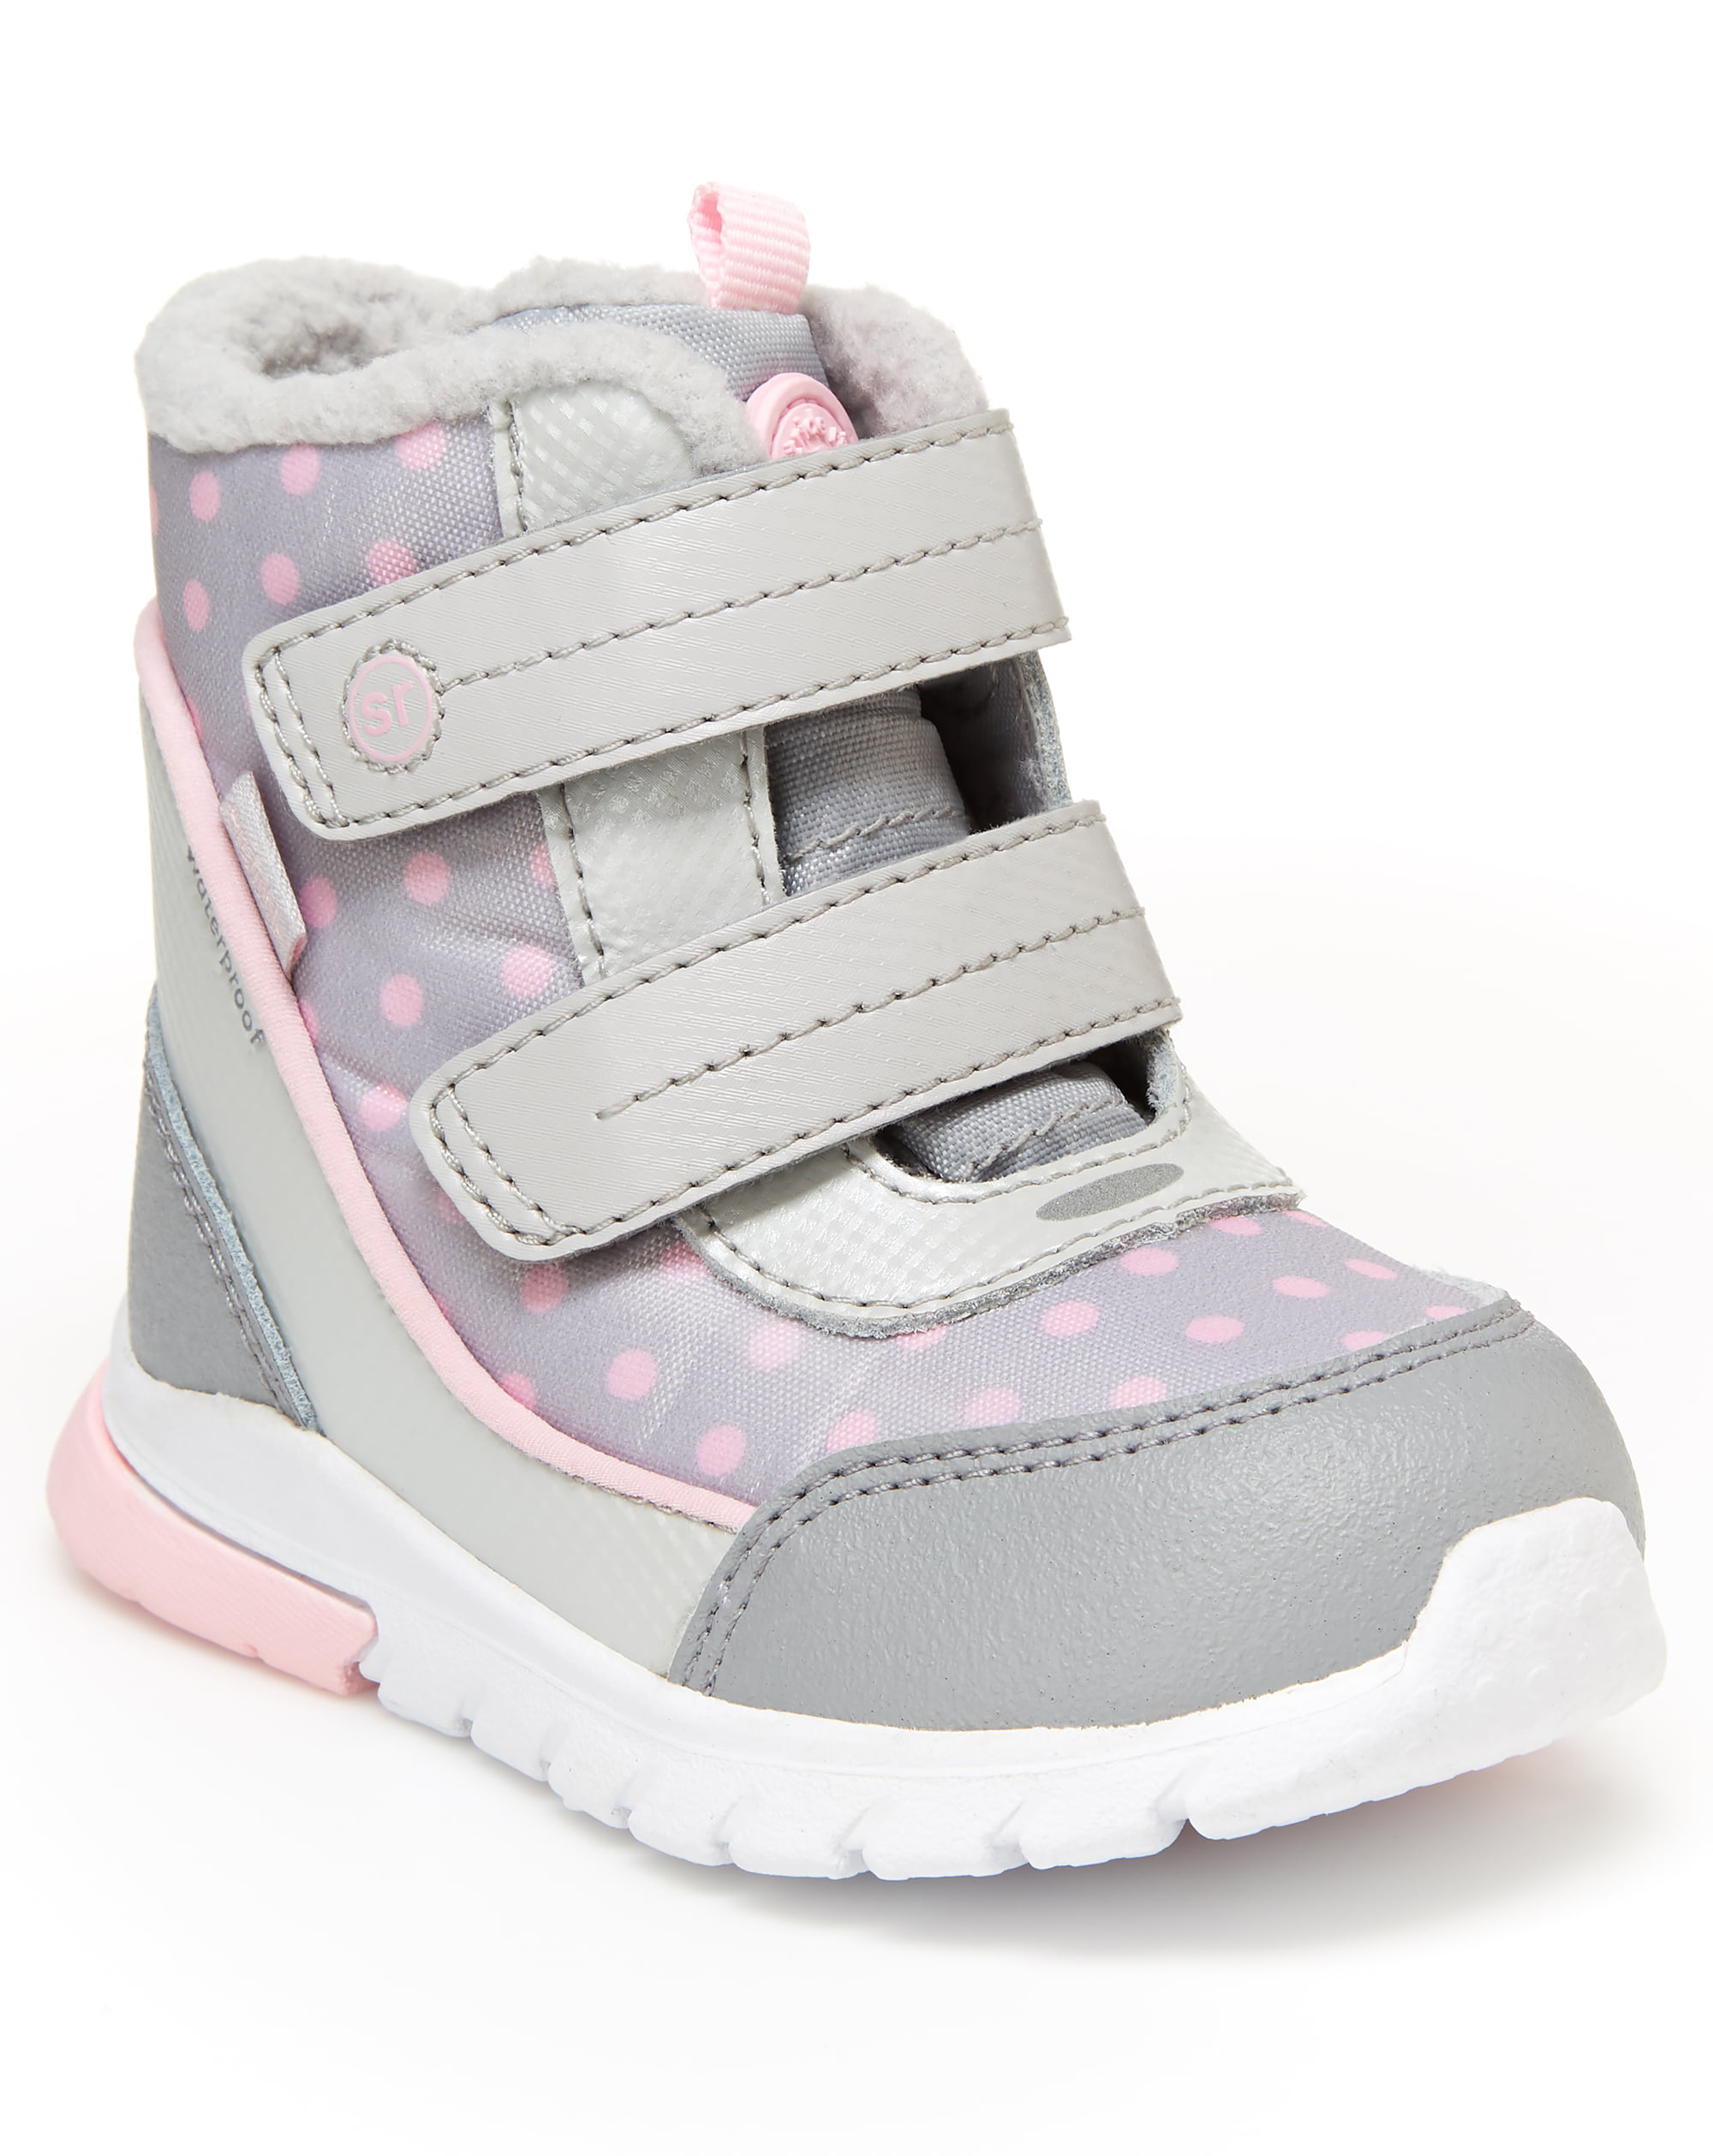 Stride Rite Unisex-Child Made2play Shay Snow Boot 